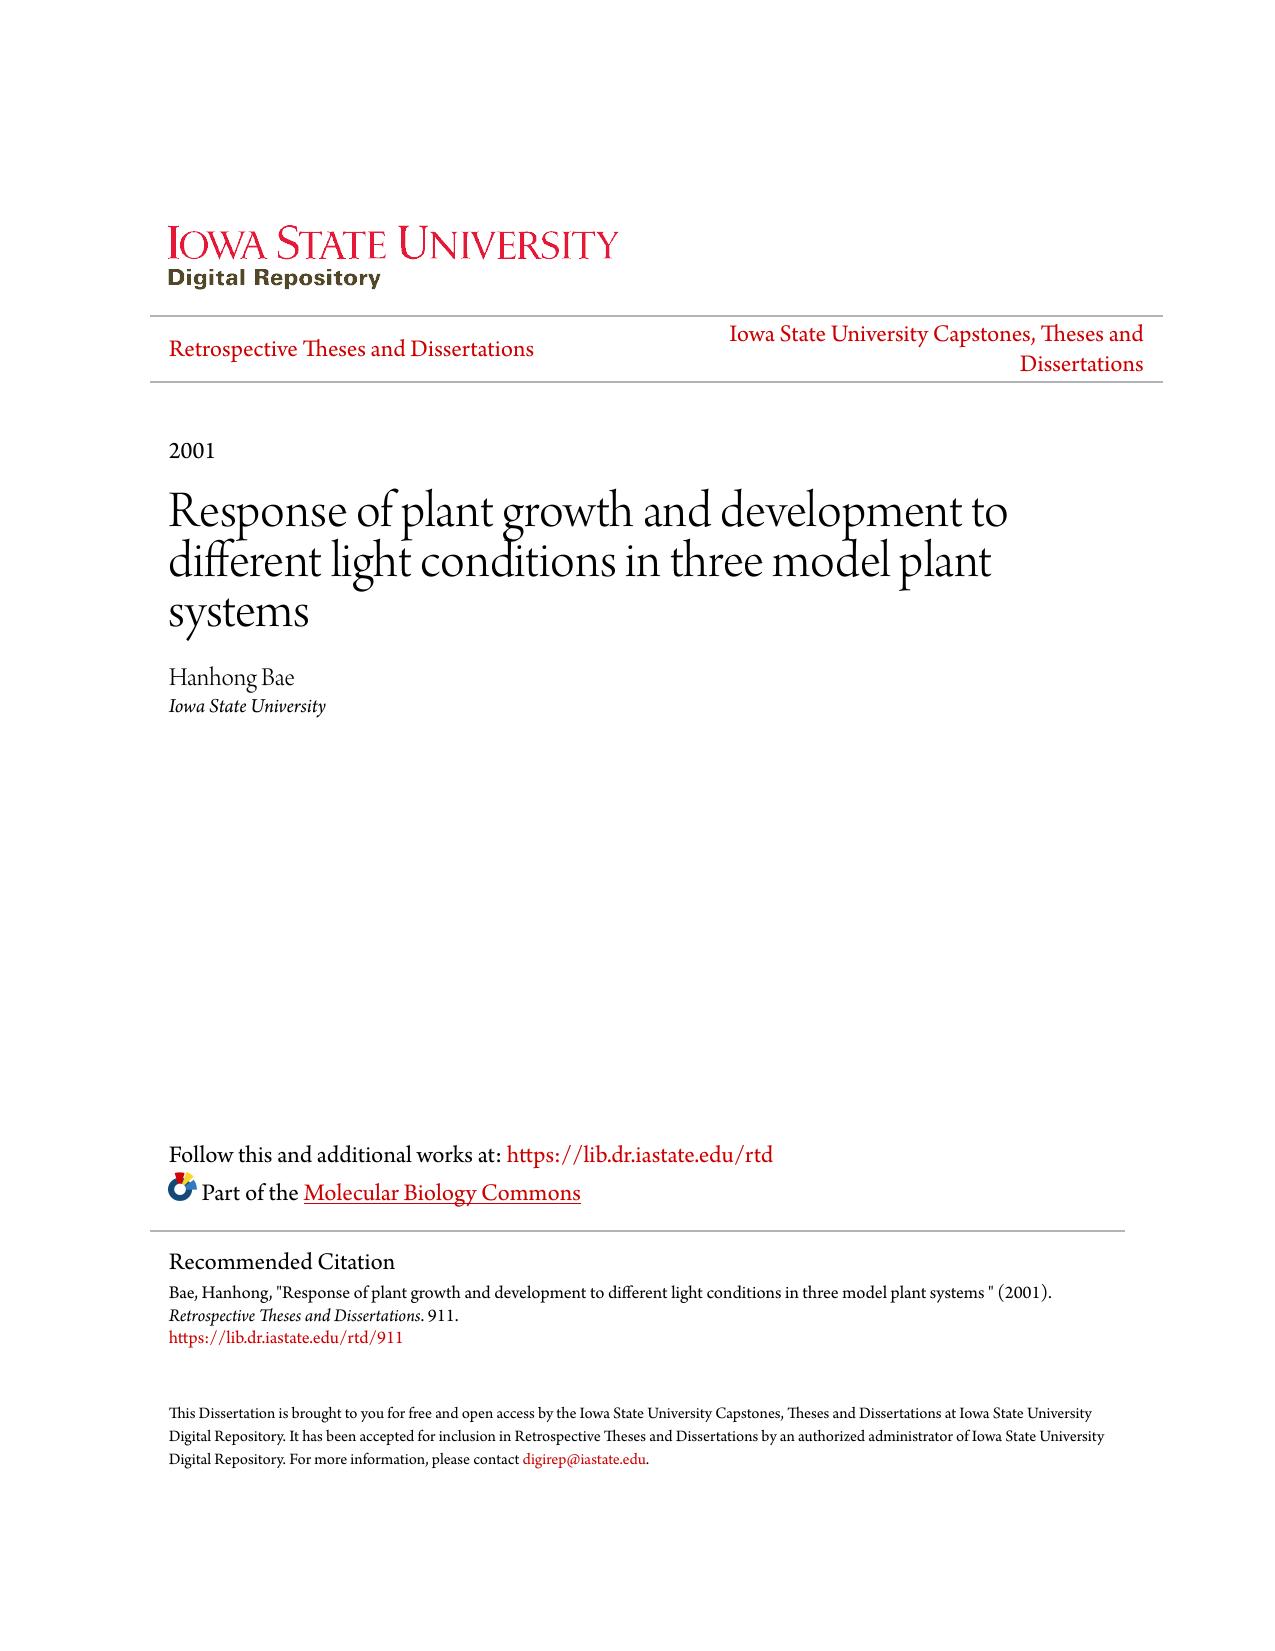 Response of plant growth and development to different light conditions in three model plant systems